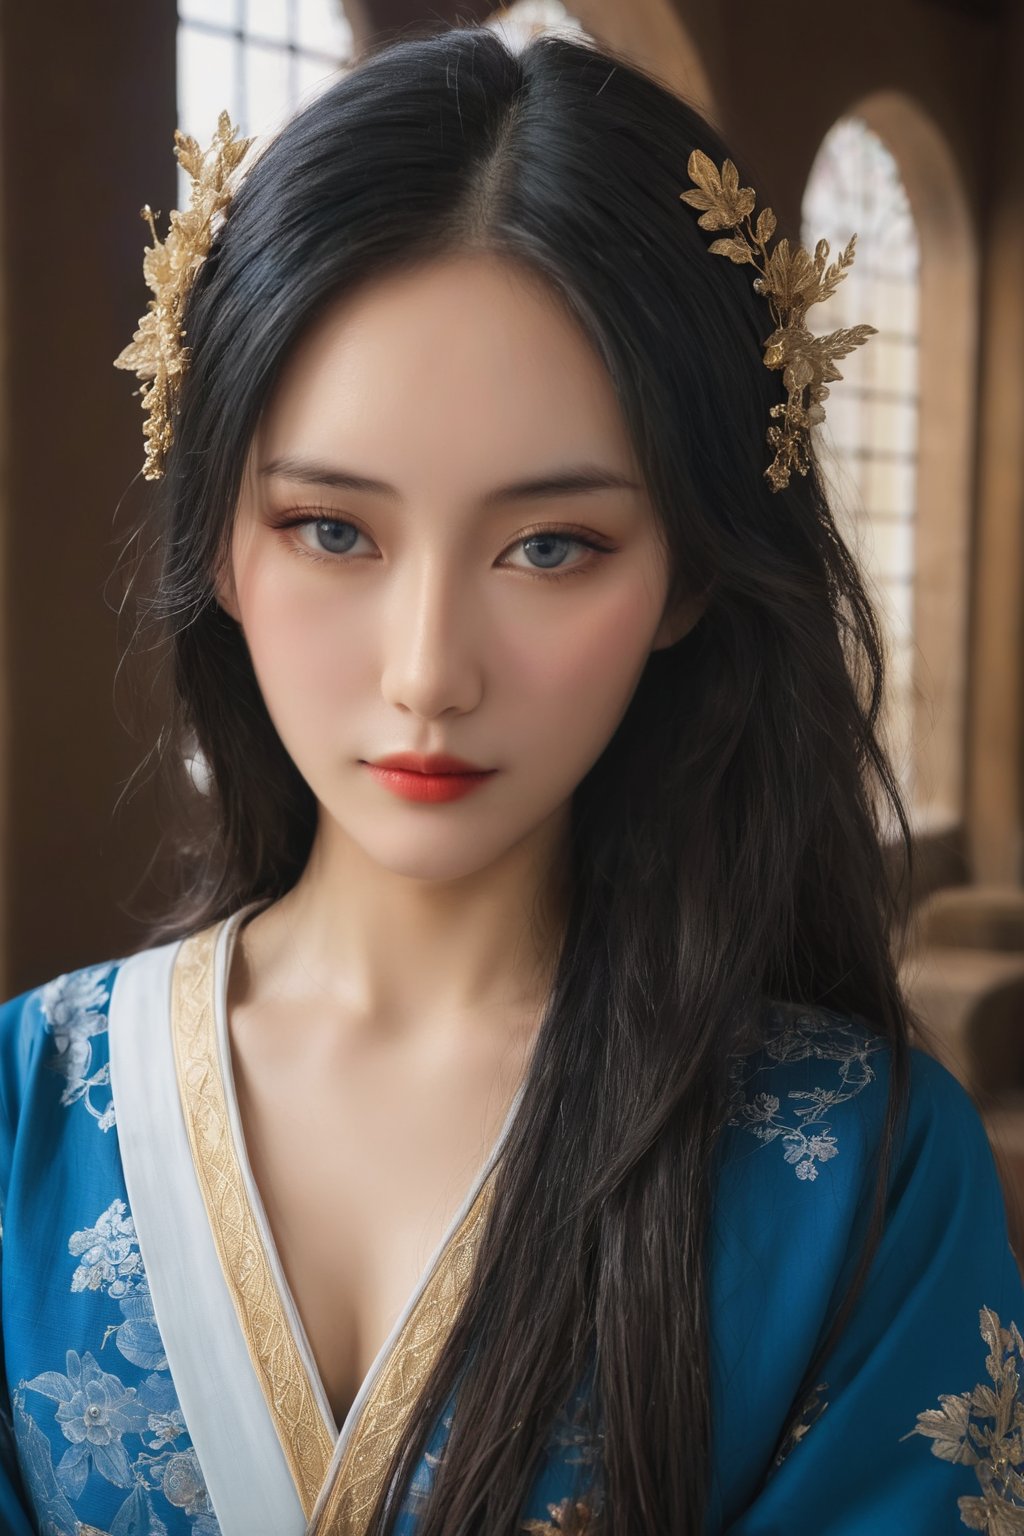  photorealistic,portrait of hubggirl, 
(ultra realistic,best quality),photorealistic,Extremely Realistic, in depth, cinematic light,

1girl, hanfu, Portrait of noble and graceful goddess, dressed in blue and gold, elaborate coiffure hairstyle, dark hair, 

perfect lighting, vibrant colors, intricate details, high detailed skin, pale skin, intricate background, realism,realistic,raw,analog,portrait,photorealistic, taken by Canon EOS,SIGMA Art Lens 35mm F1.4,ISO 200 Shutter Speed 2000,Vivid picture,